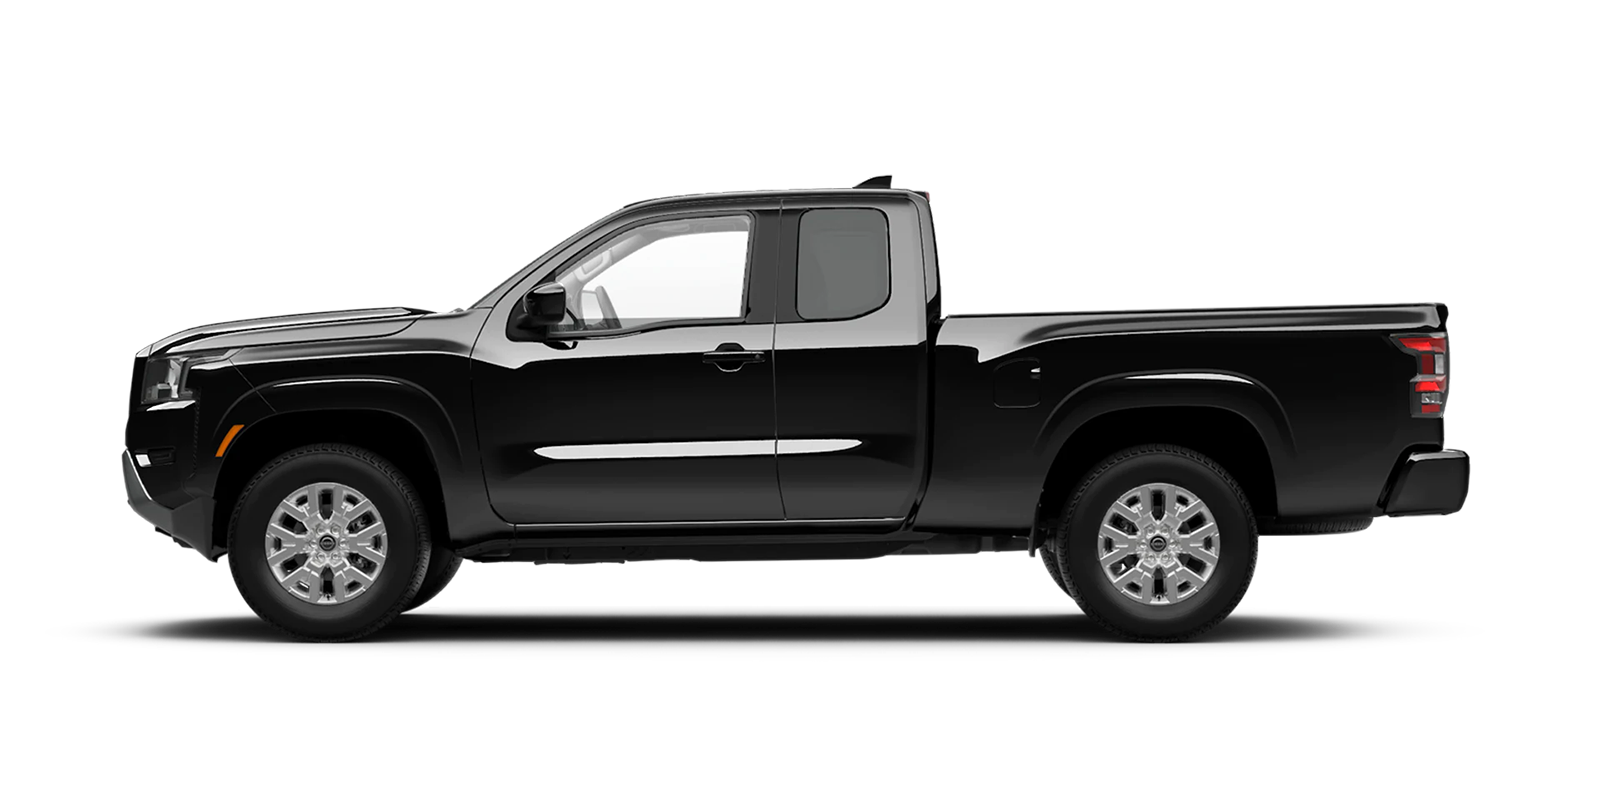 2022 Frontier King Cab SV 4x4 in Super Black | Rolling Hills Nissan in Saint Joseph MO